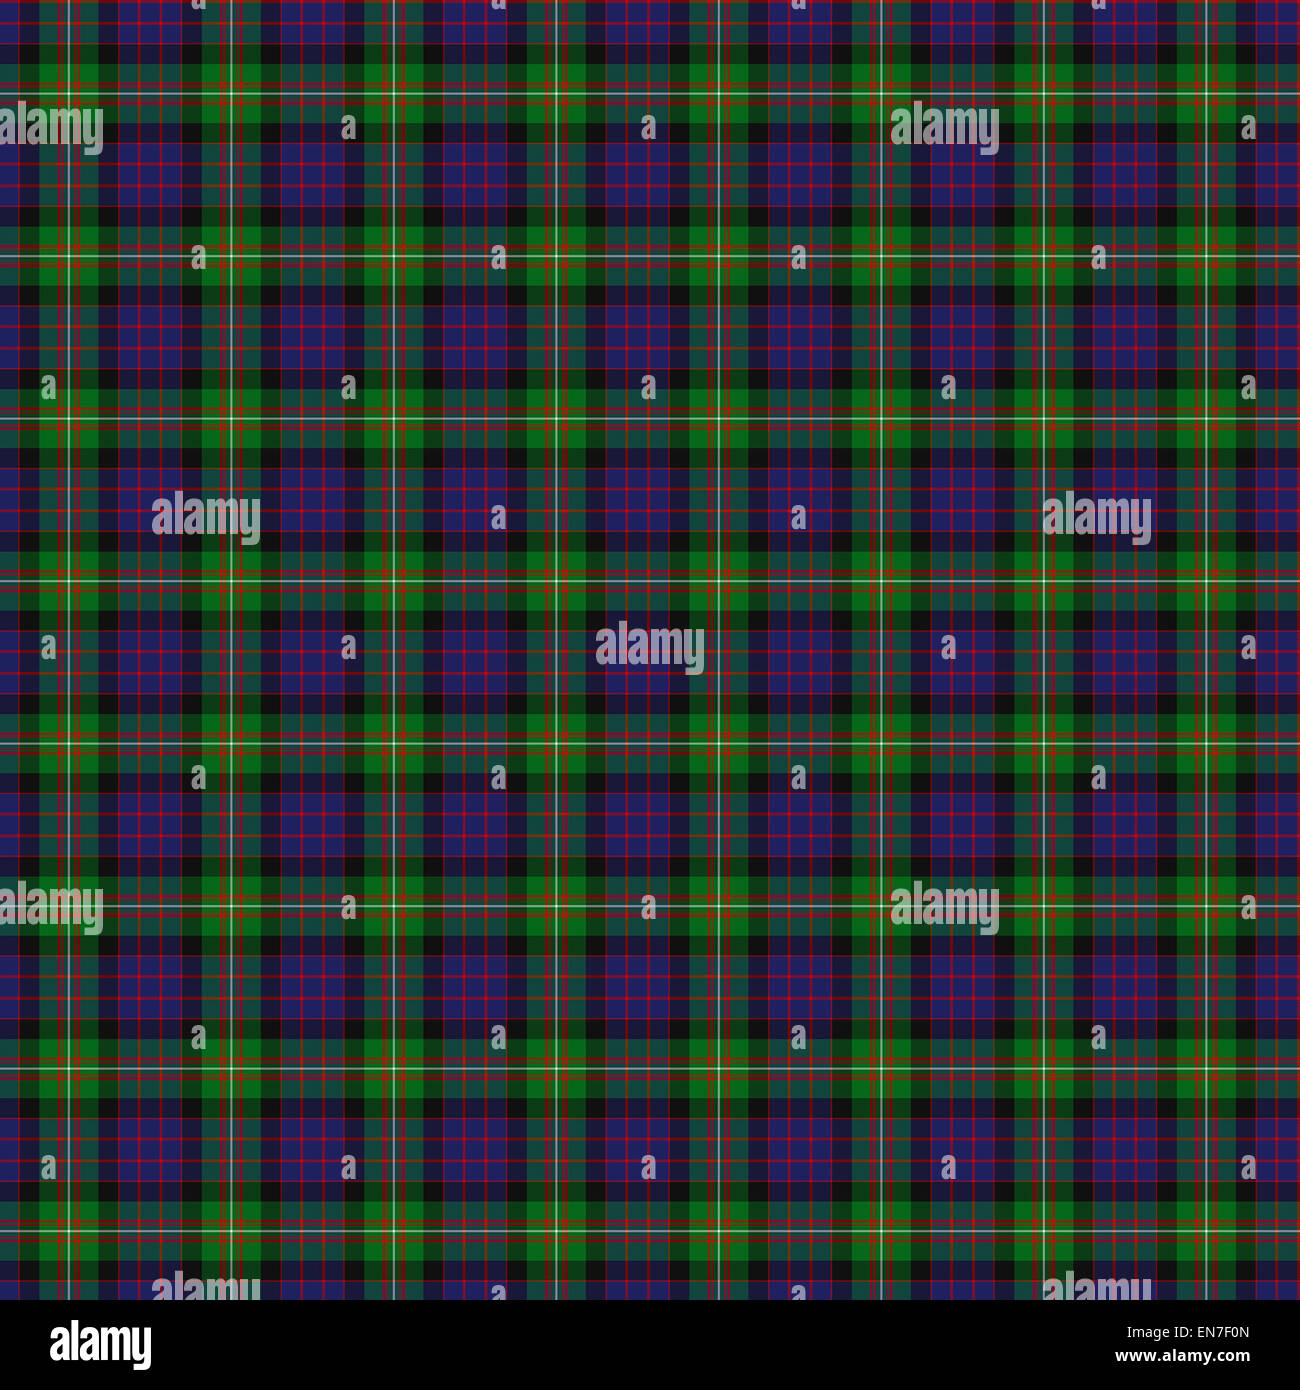 A seamless patterned tile of the clan MacDonell of Glengarry tartan. Stock Photo